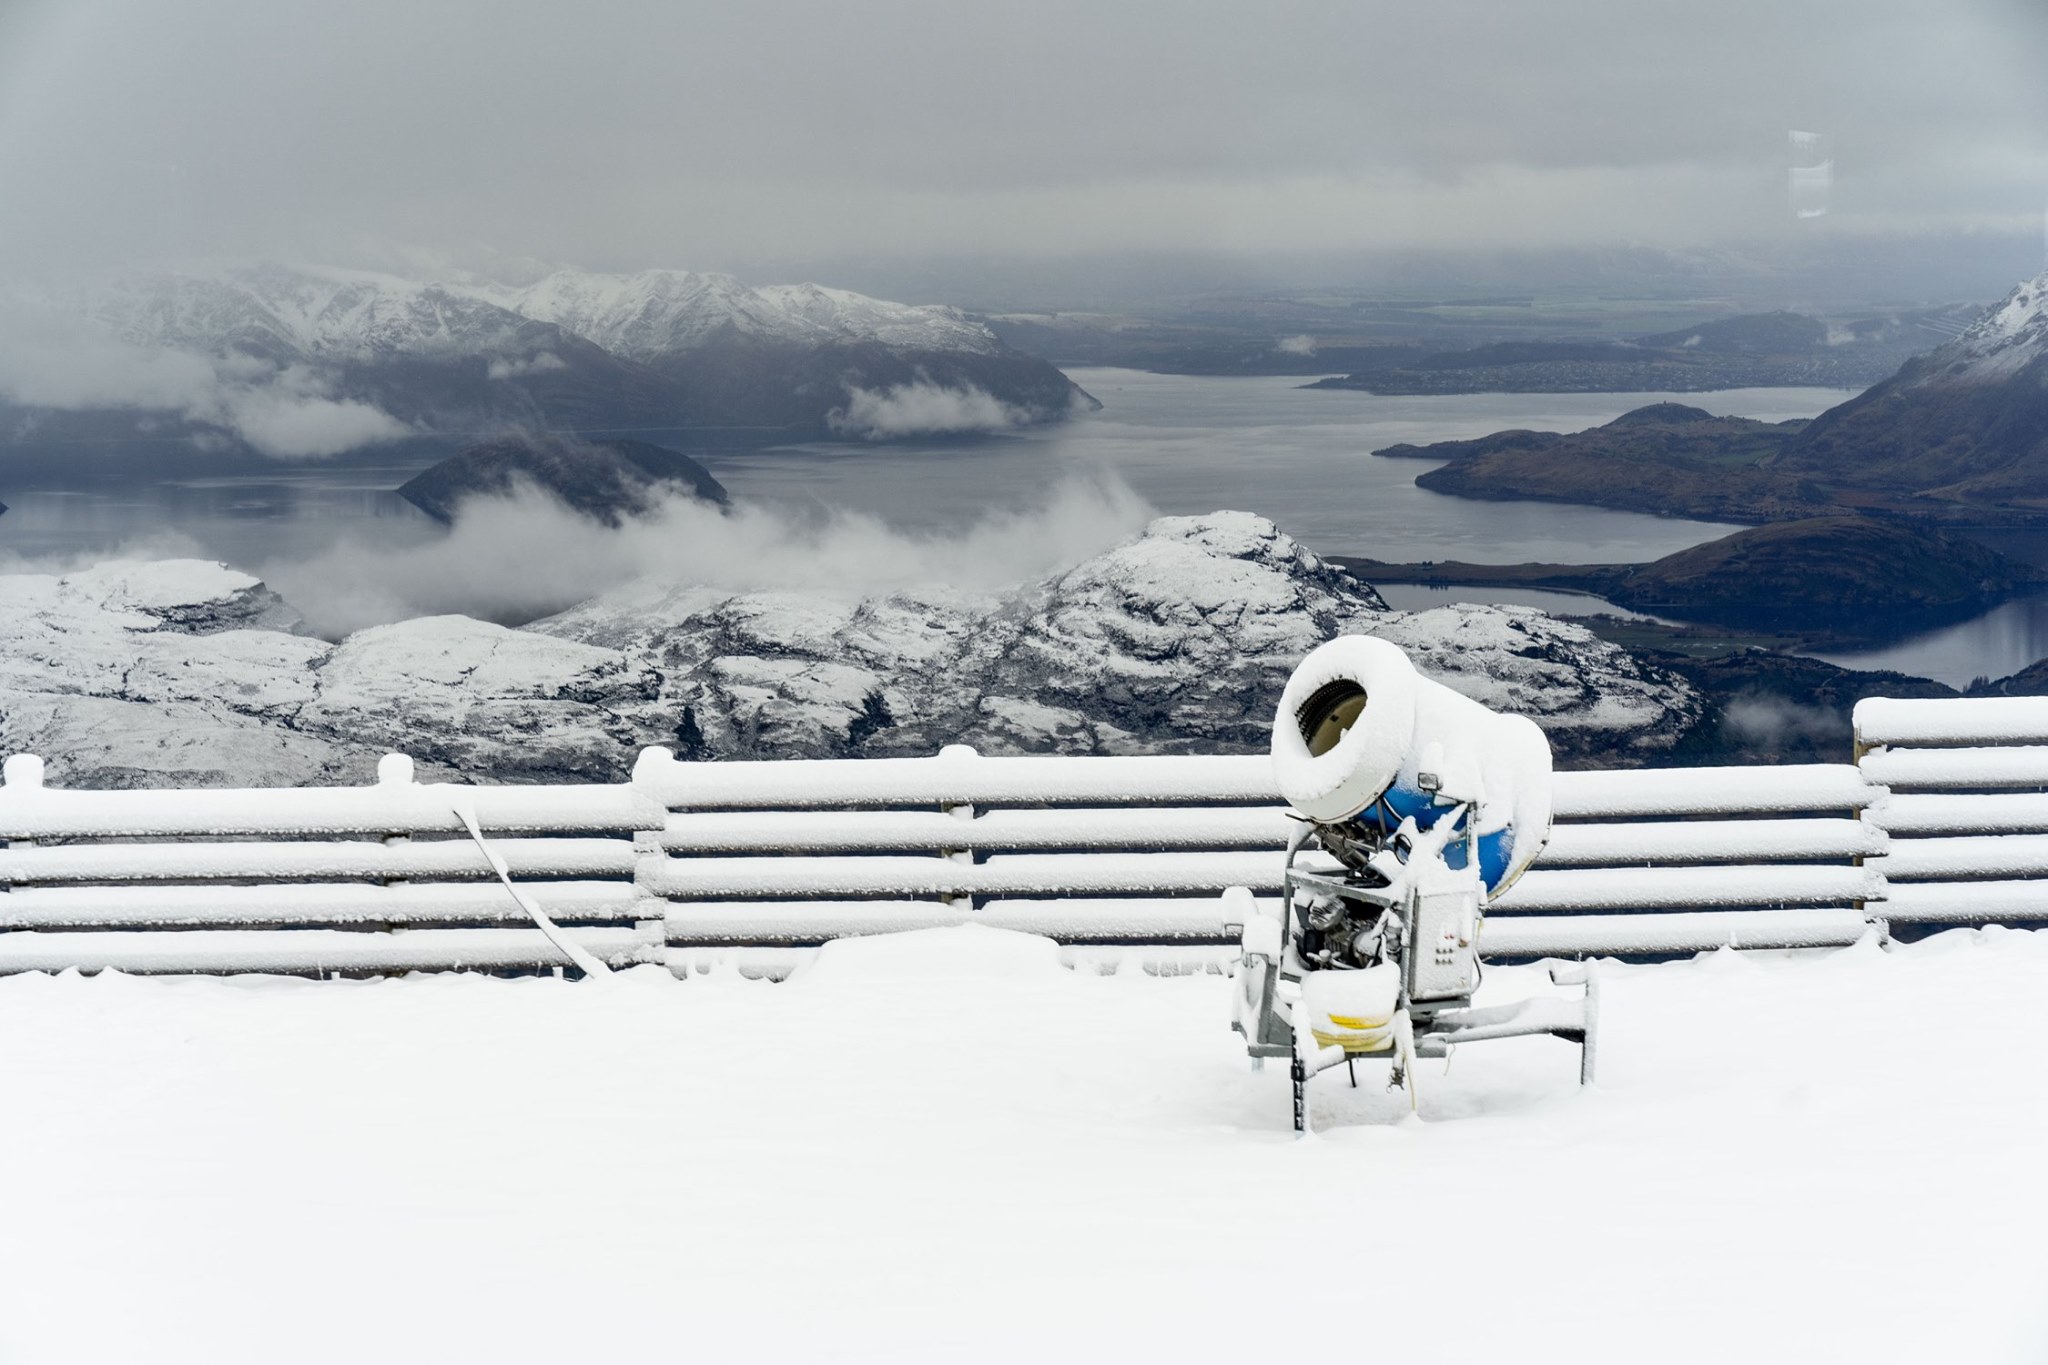 Up to 45cm (18”) of snow in New Zealand over the past 24 hours, Treble Cone